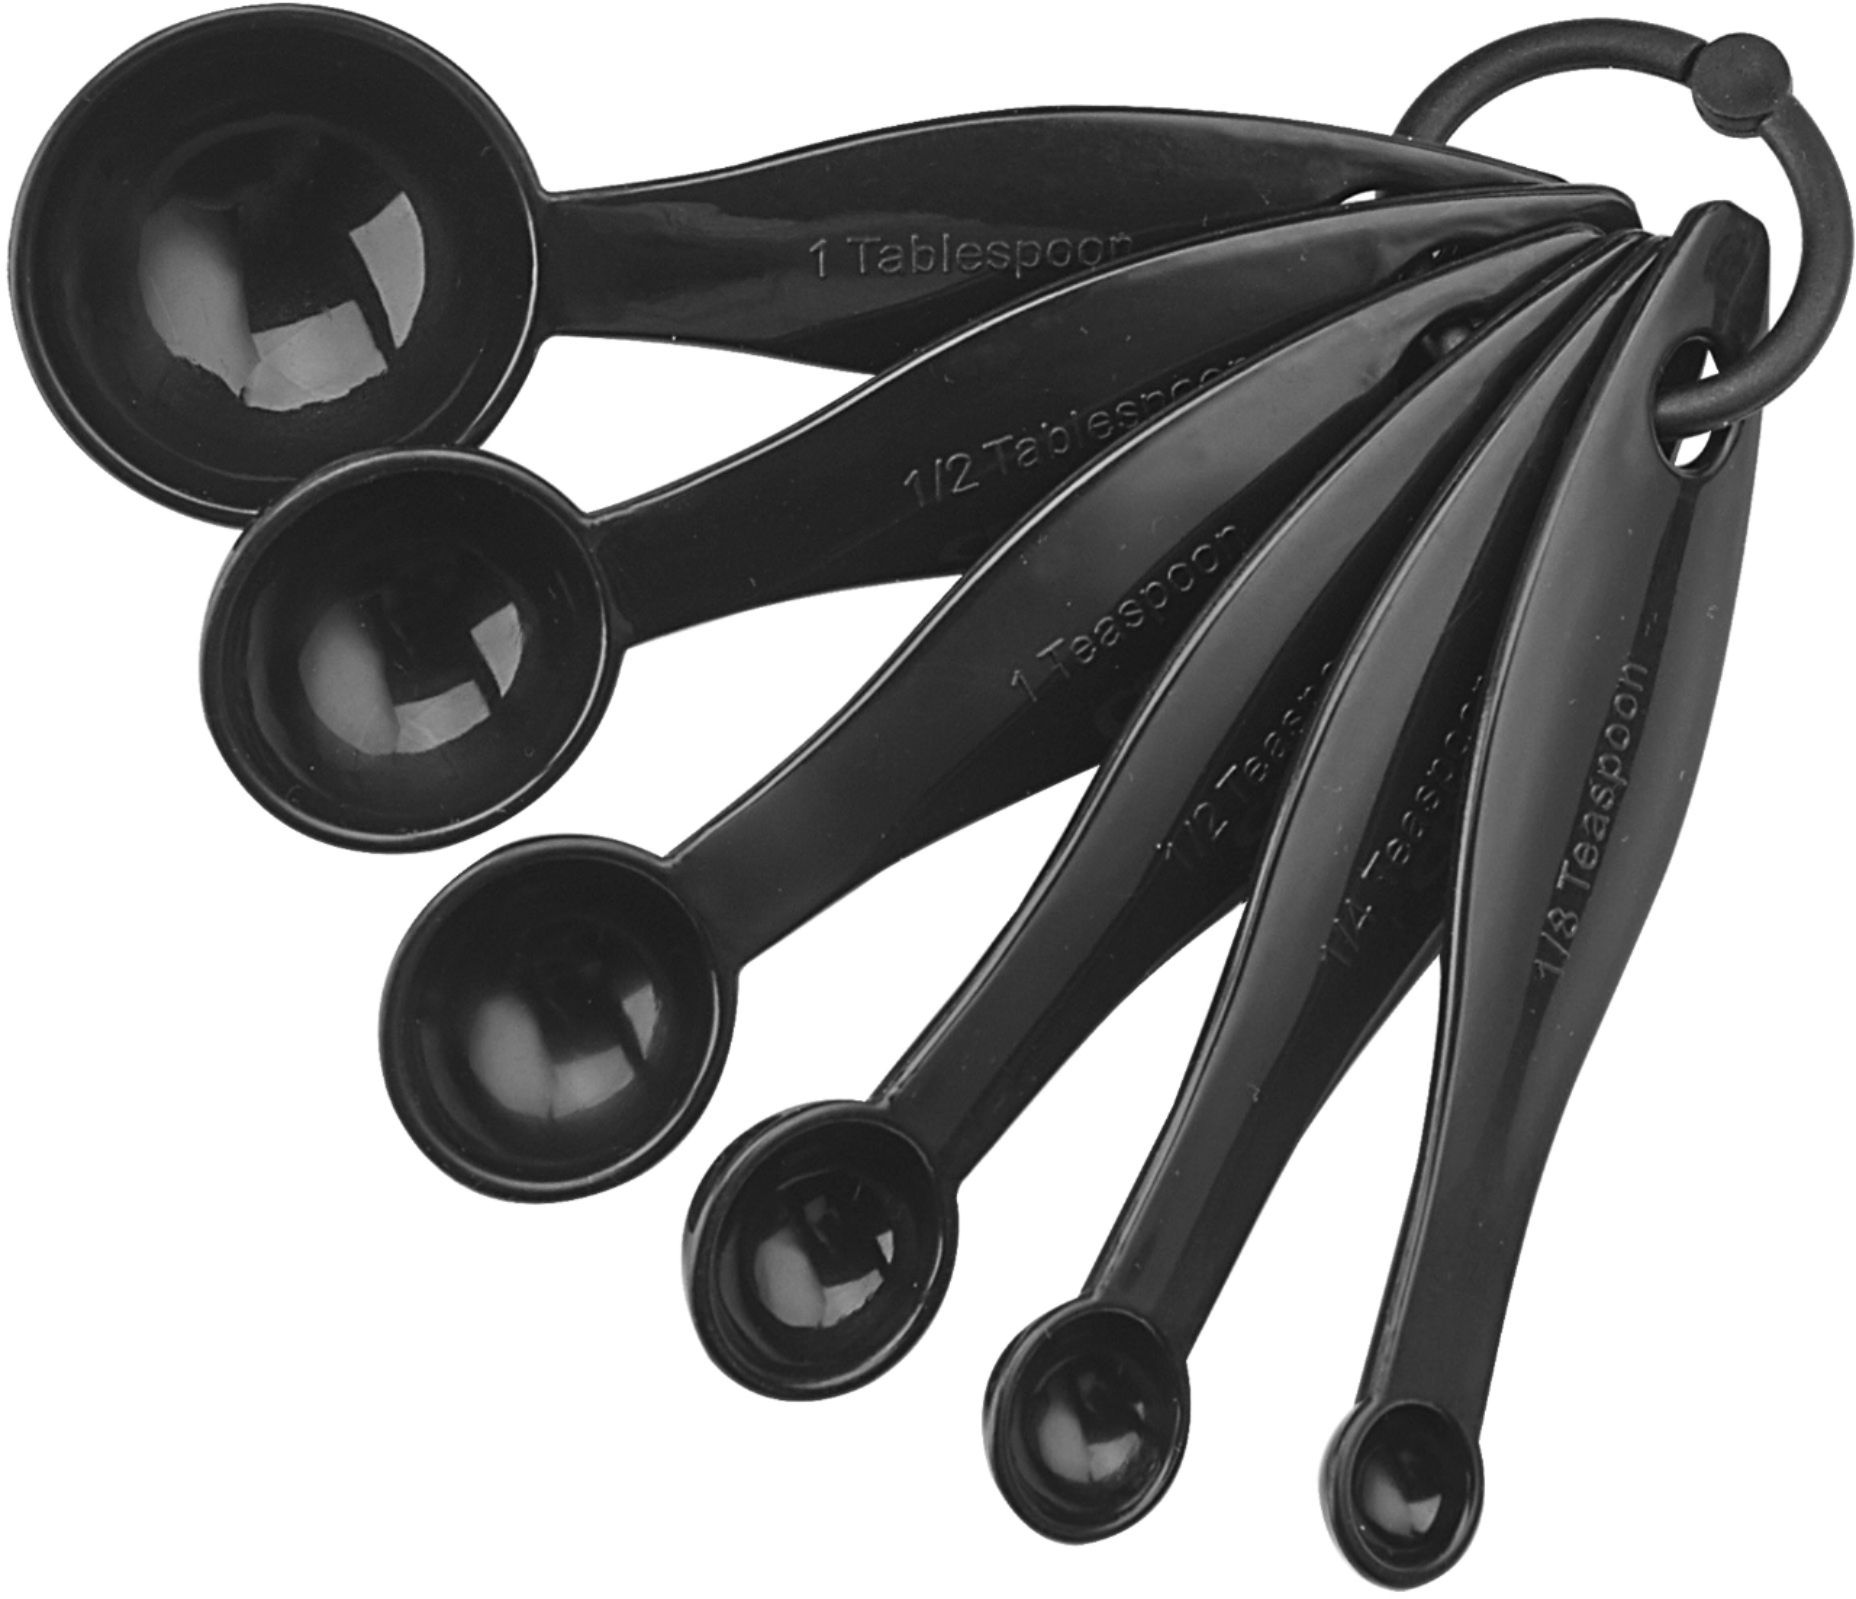 Cuisinart 6pc Stainless Steel/Nylon Essential Tools and Gadgets Set Black